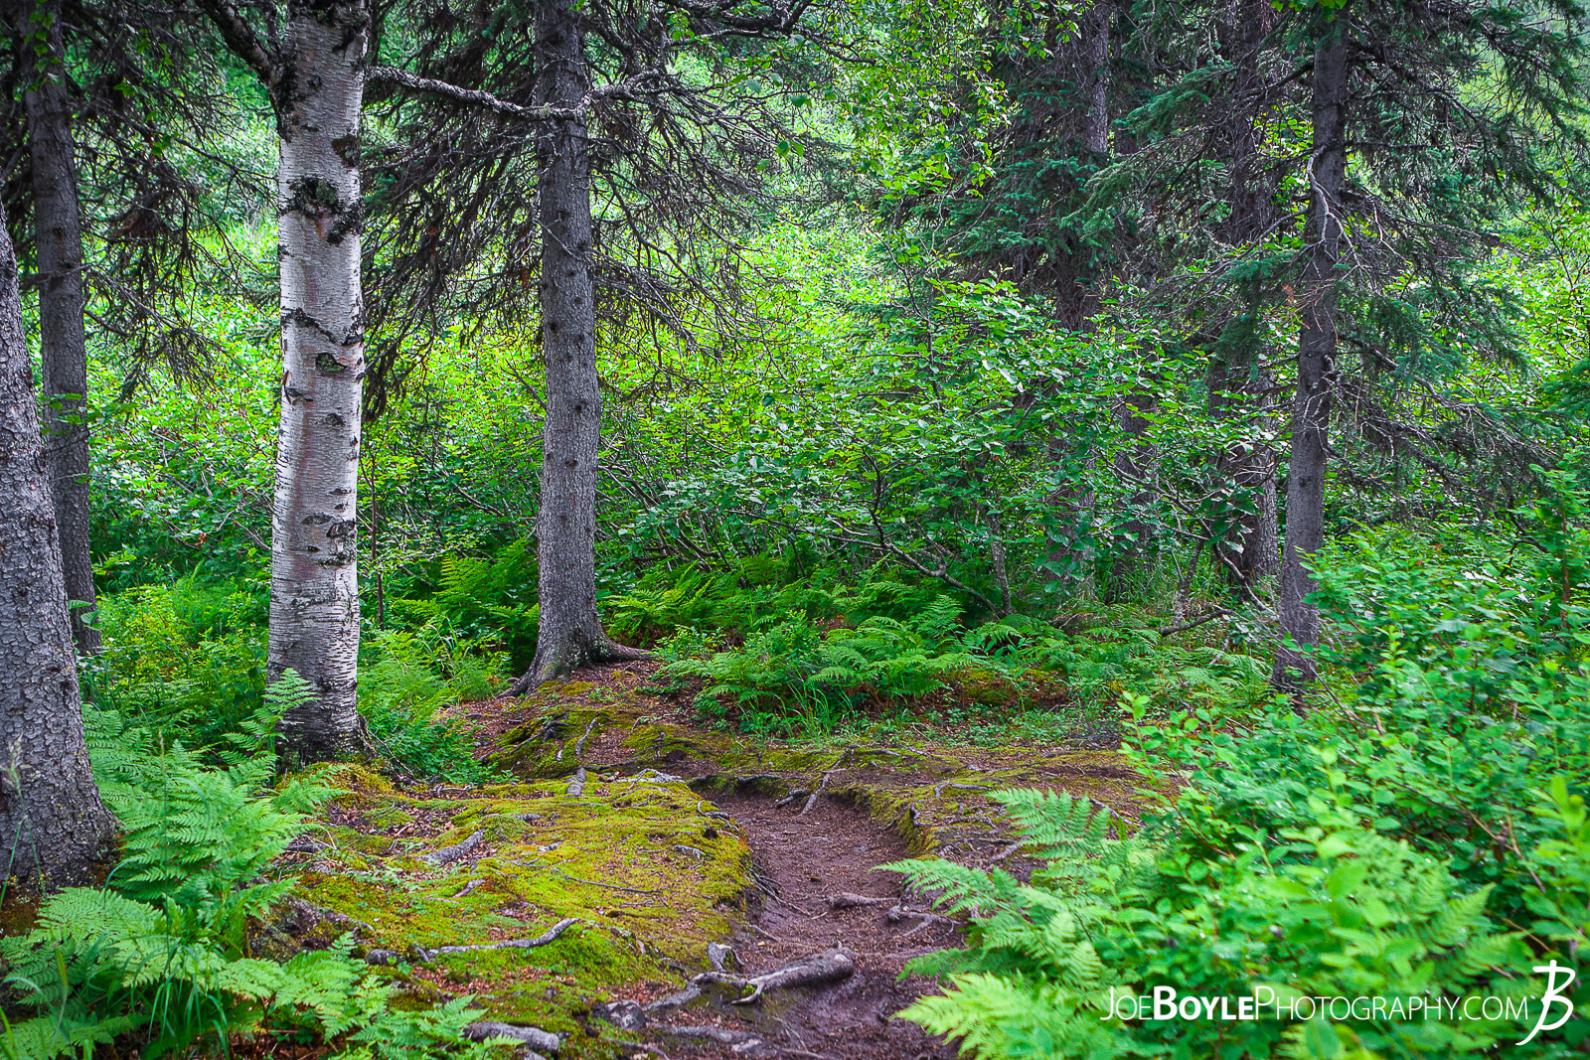 This photo is near the very beginning of the Kesugi Ridge Trail located in Denali State Park.